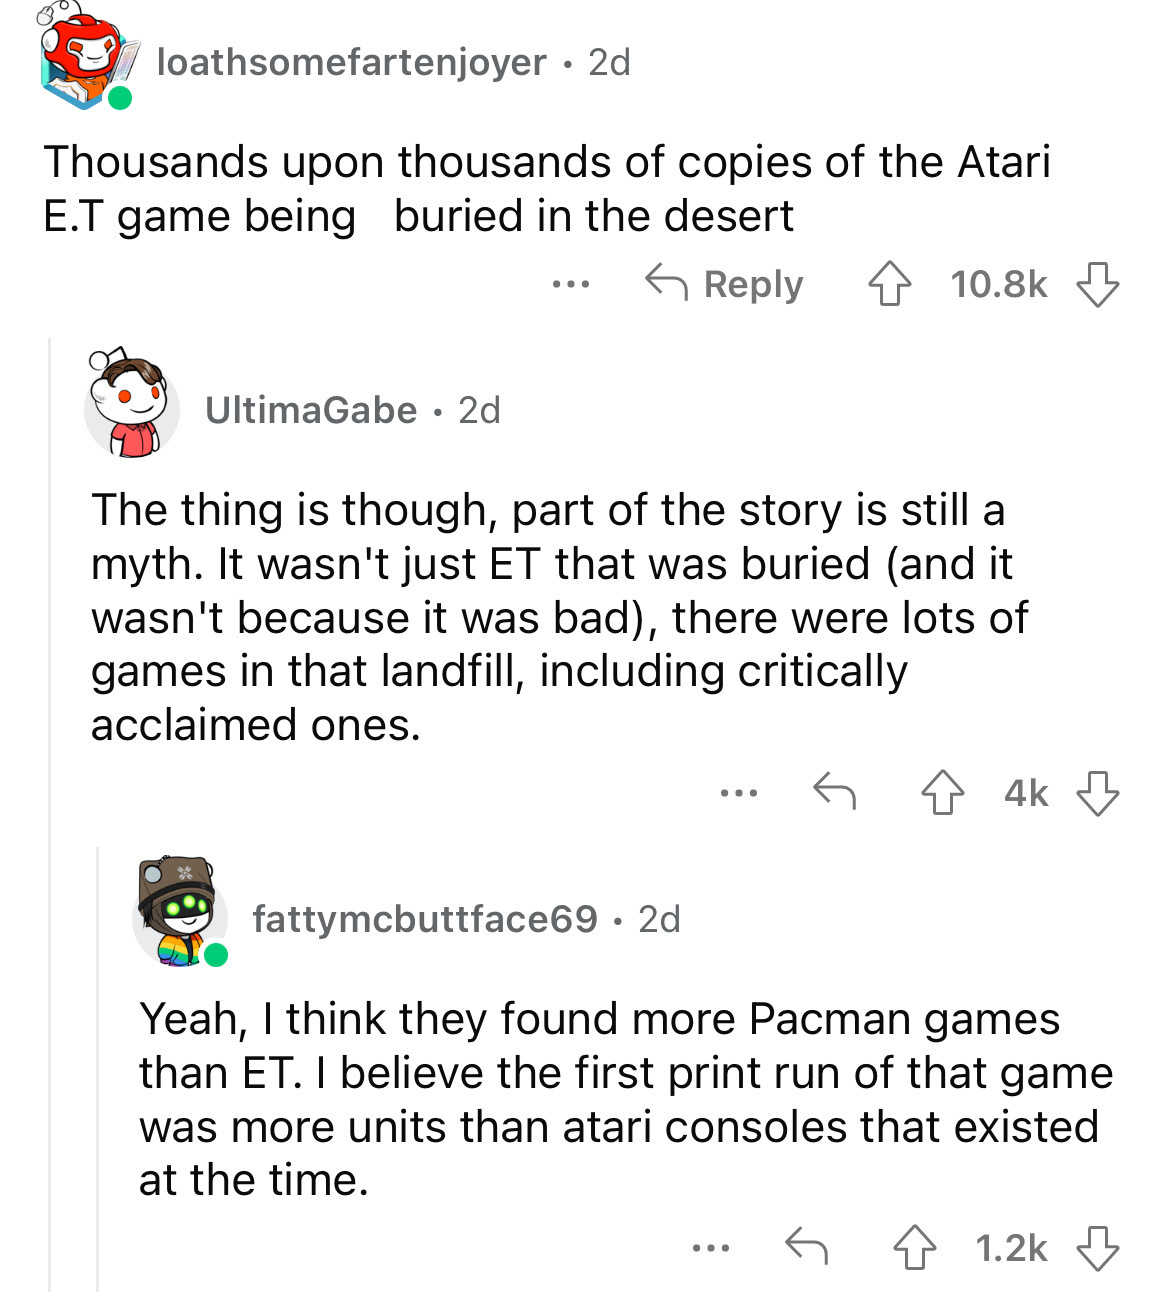 angle - loathsomefartenjoyer 2d Thousands upon thousands of copies of the Atari E.T game being buried in the desert 4 UltimaGabe 2d ... The thing is though, part of the story is still a myth. It wasn't just Et that was buried and it wasn't because it was 